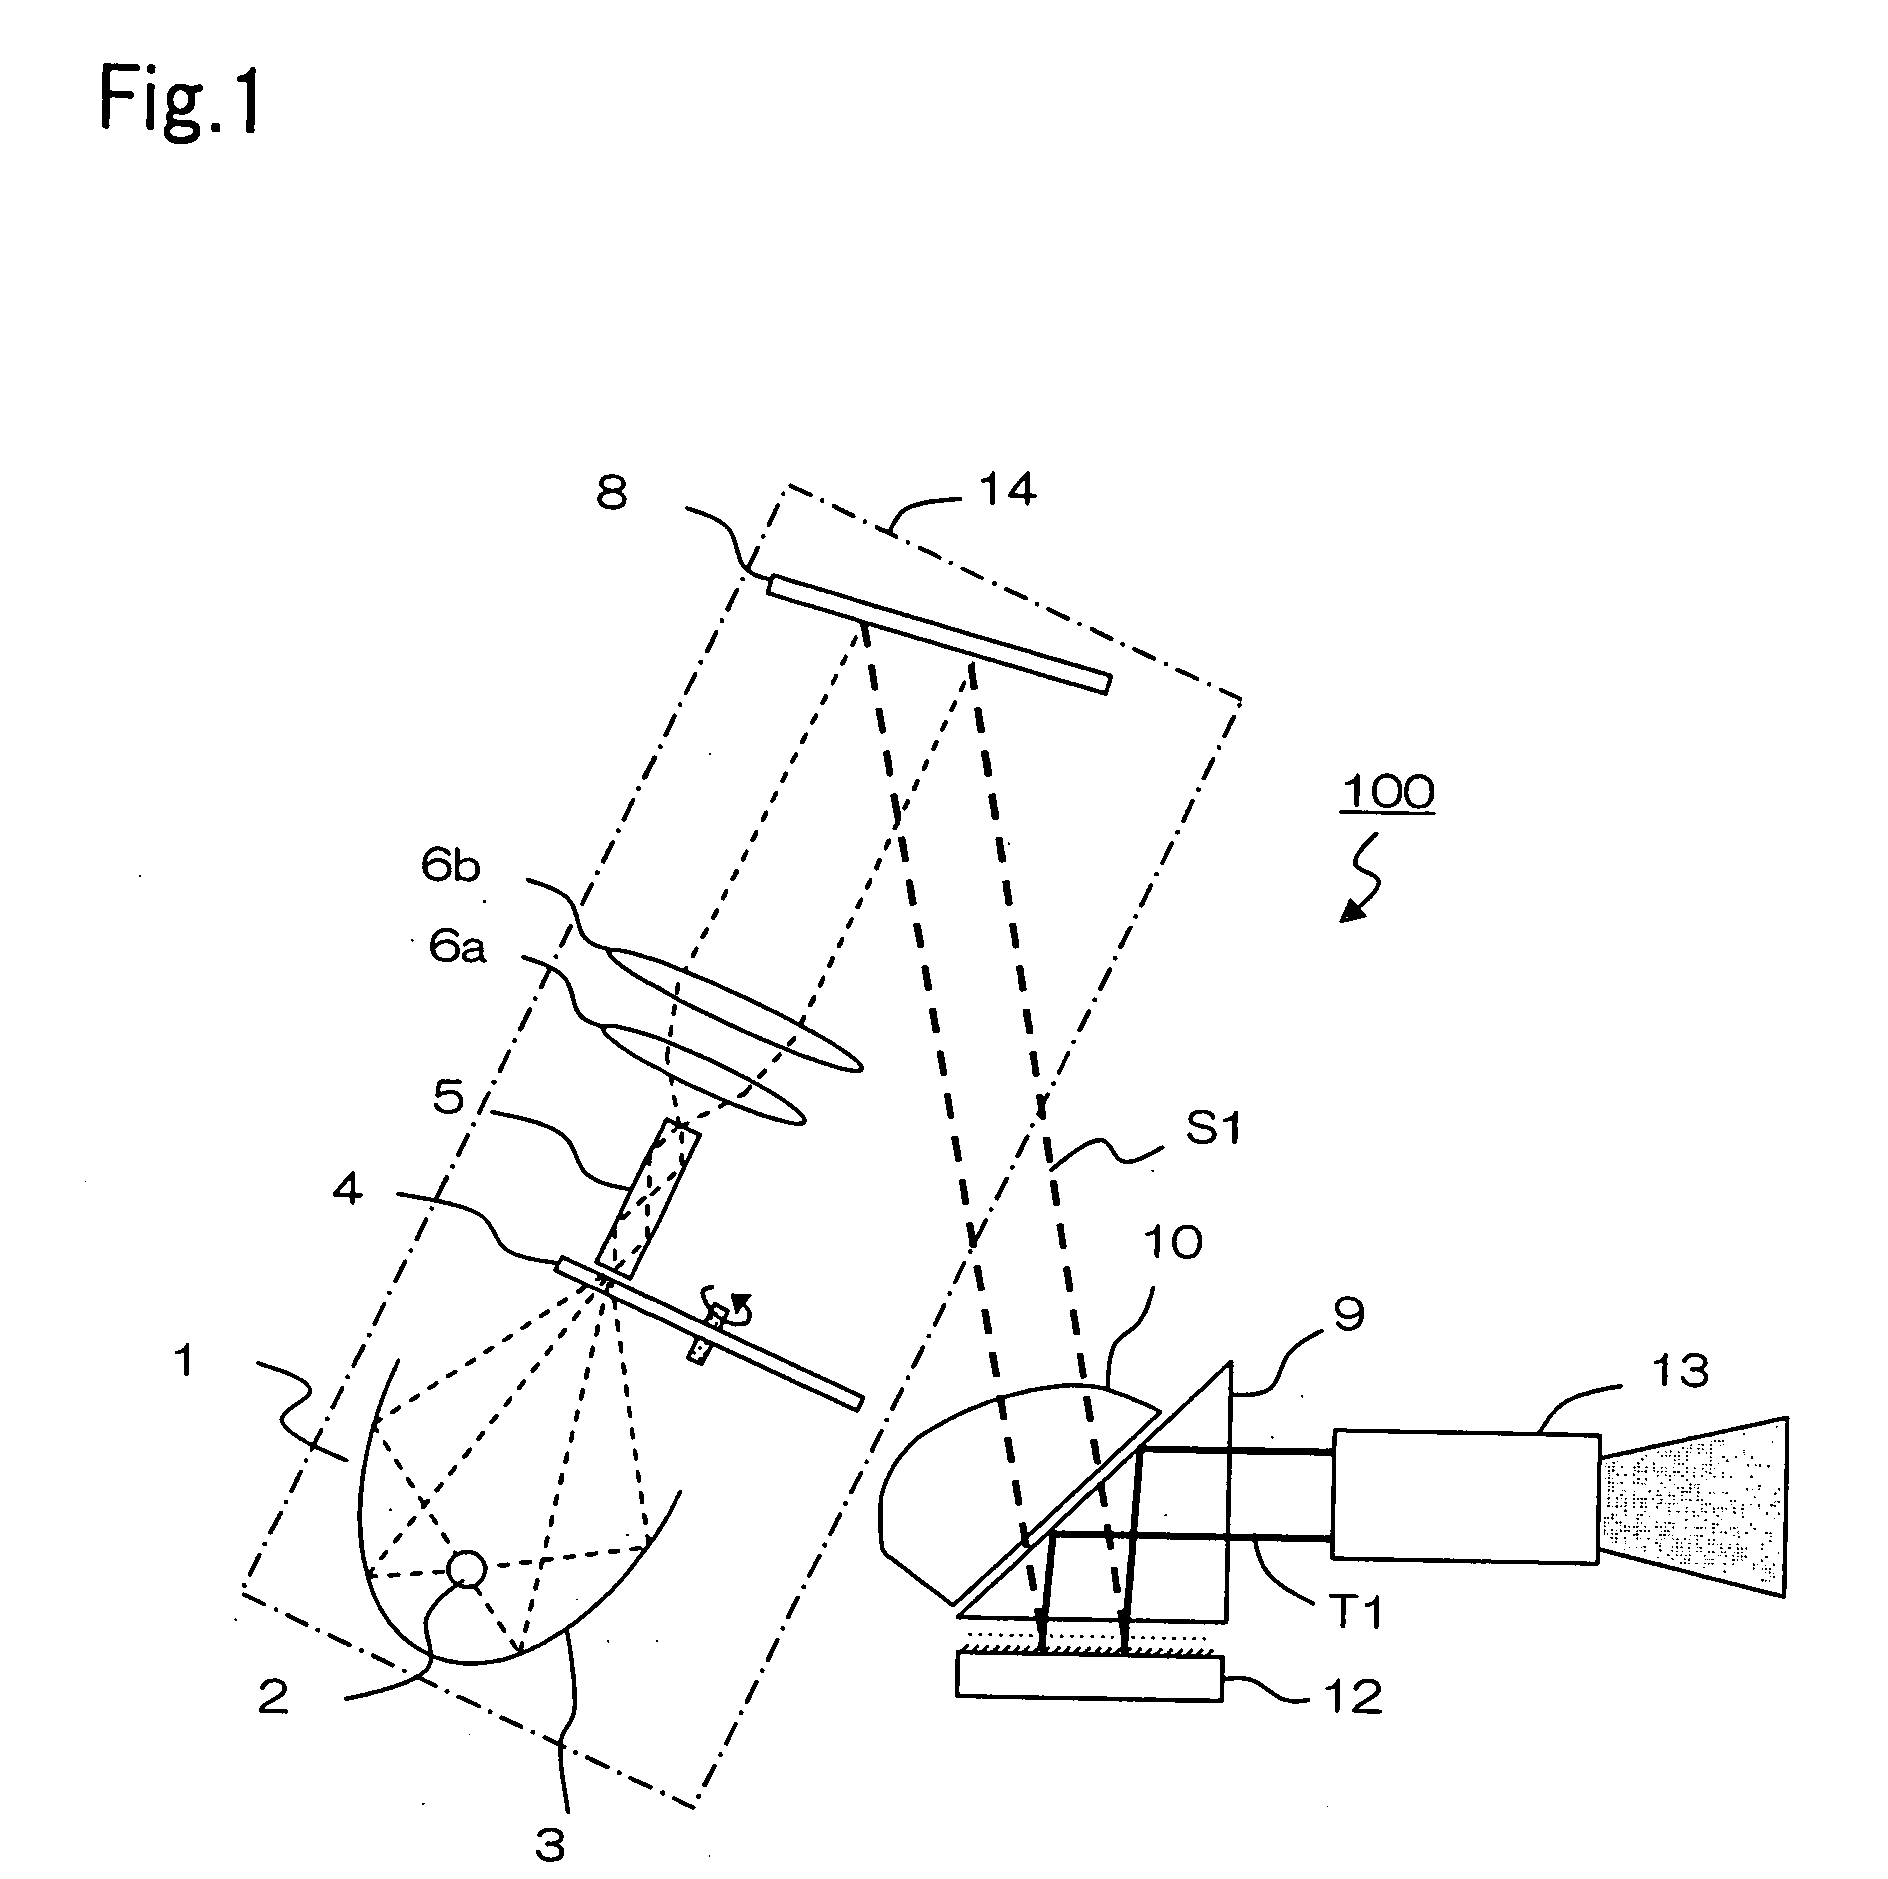 TIR PRISM for a projection display apparatus having a partially masked surface